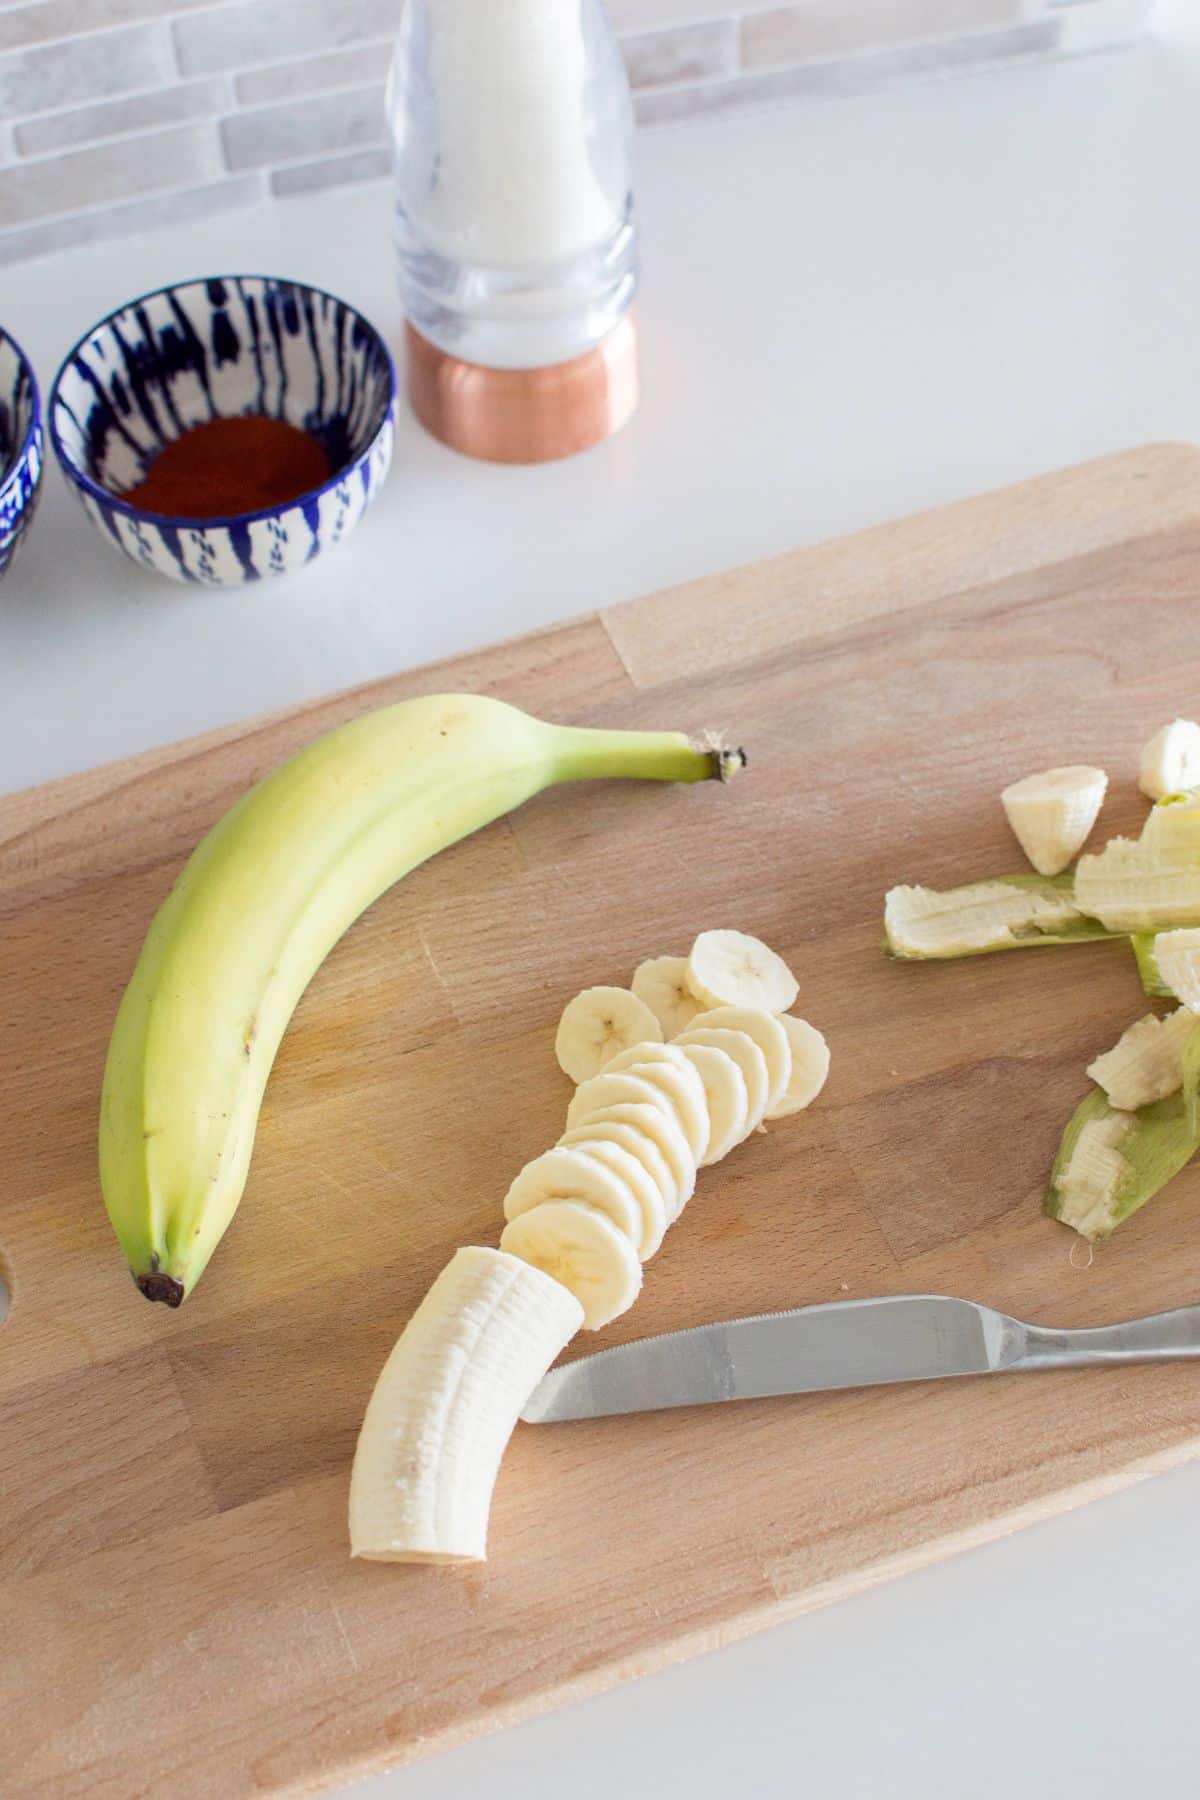 a banana next to a partially sliced banana and a banana peel on a wooden cutting board with a knife